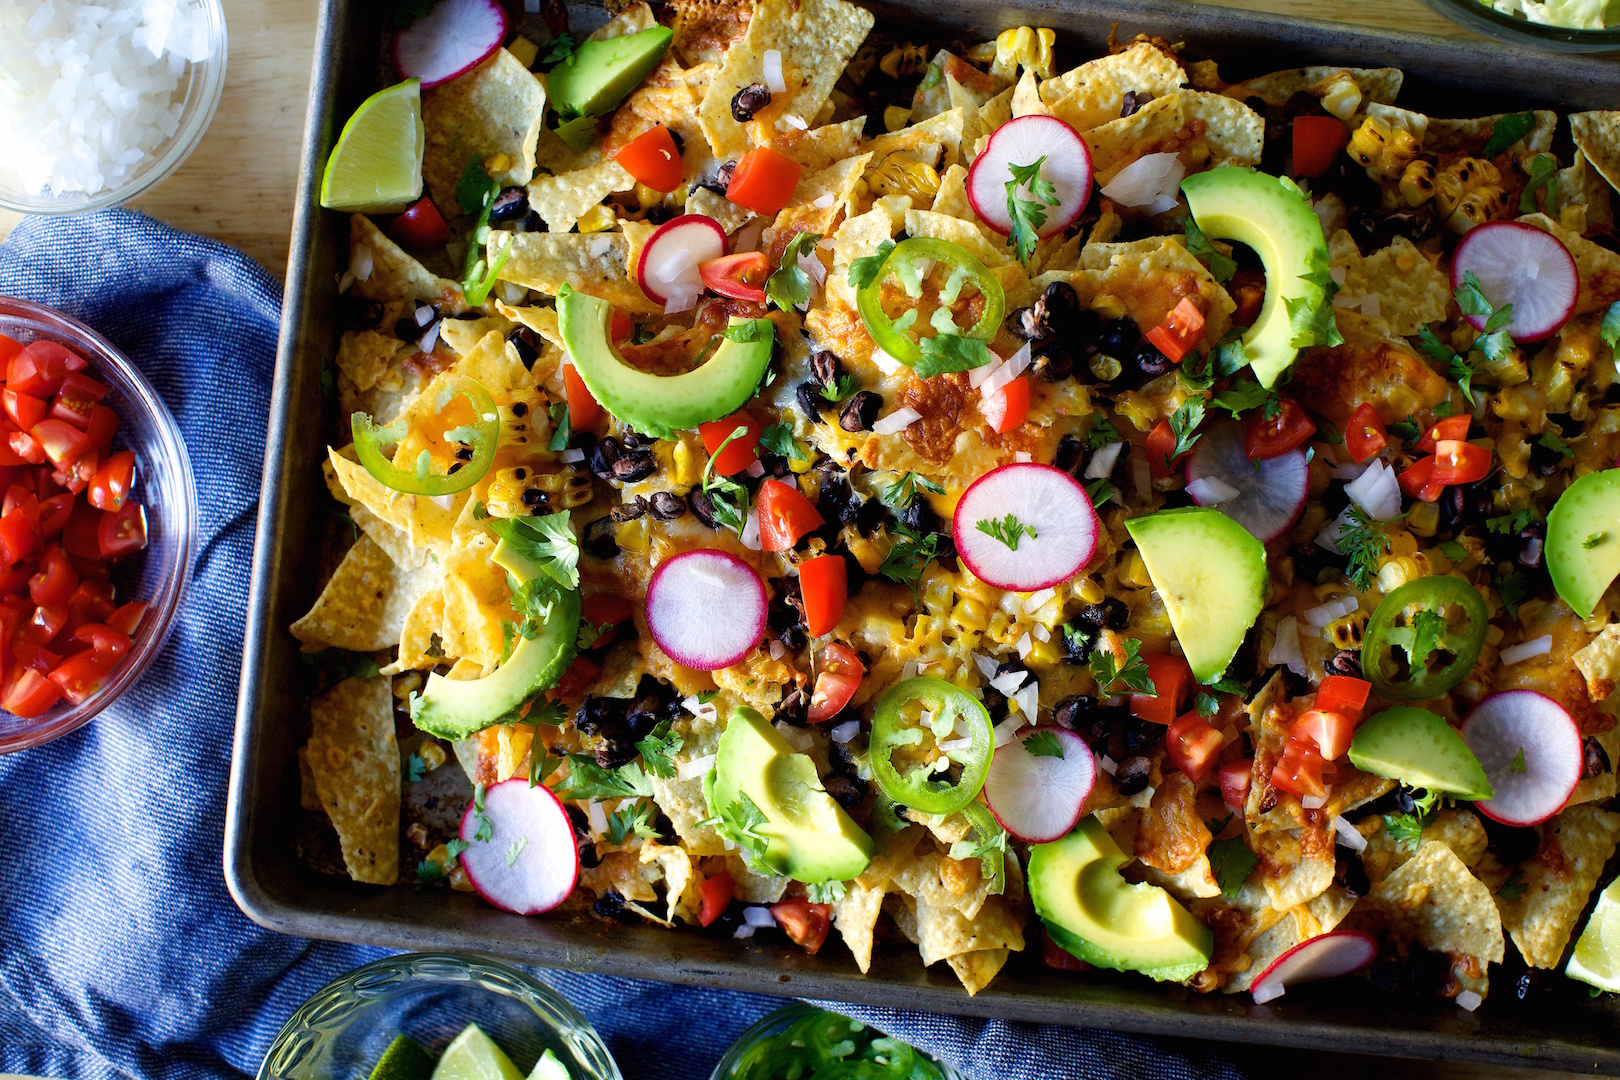 summer treats you can enjoy from home on a budget. nachos are a staple at ball games, festivals, and amusement parks. make your own gourmet version at home.